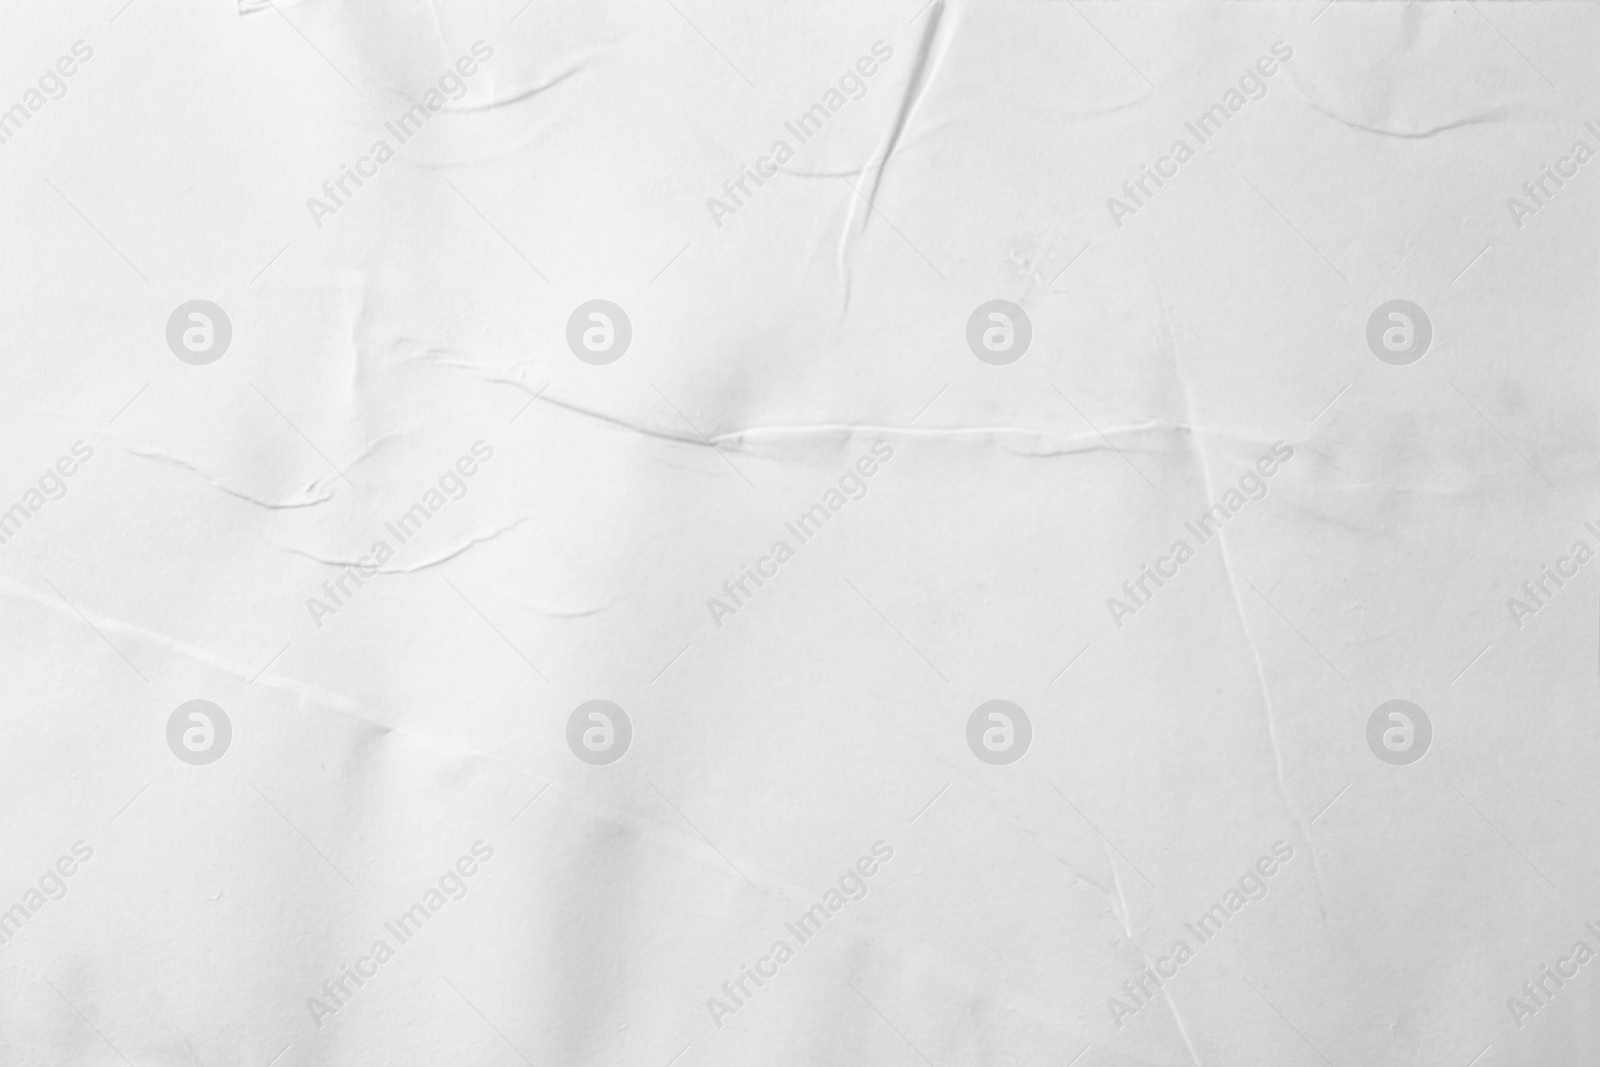 Photo of Texture of white creased paper, closeup view